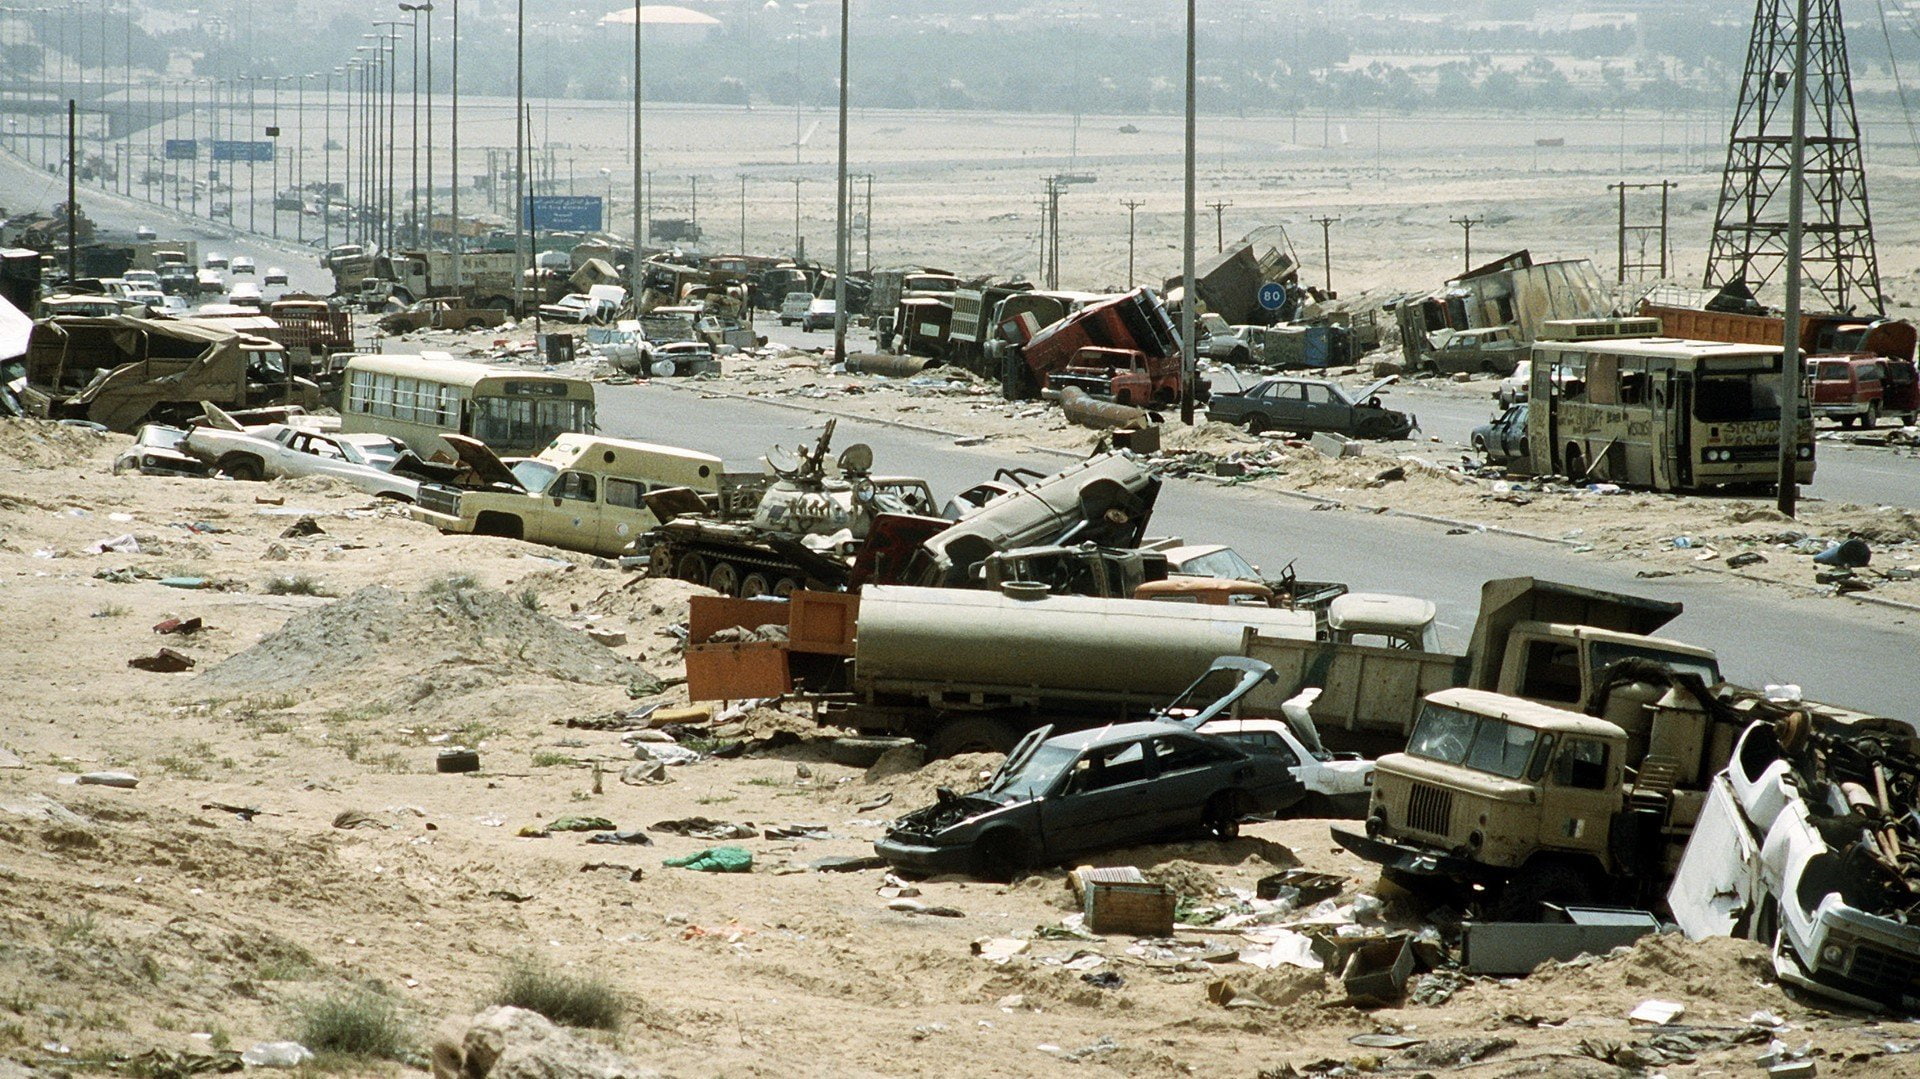 Buses, Highway of Death, Iraq